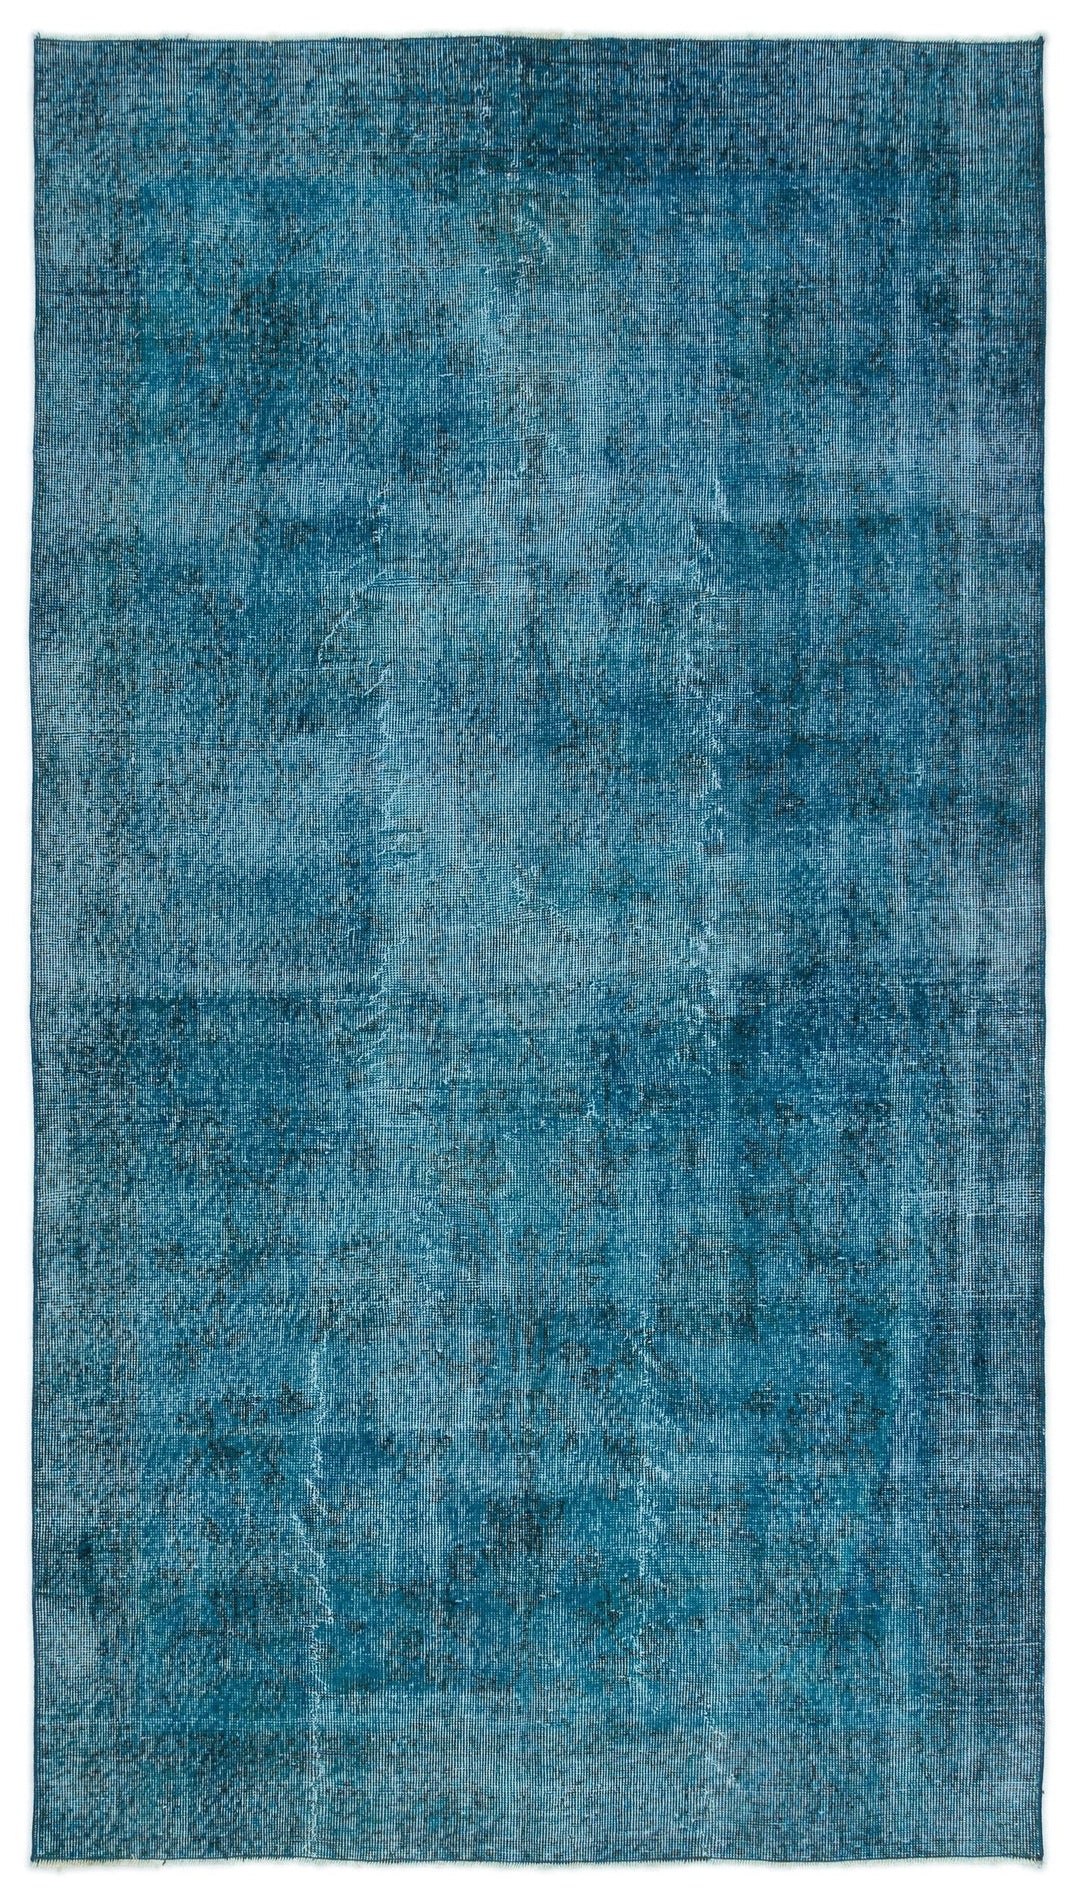 Athens Turquoise Tumbled Wool Hand Woven Carpet 146 x 260